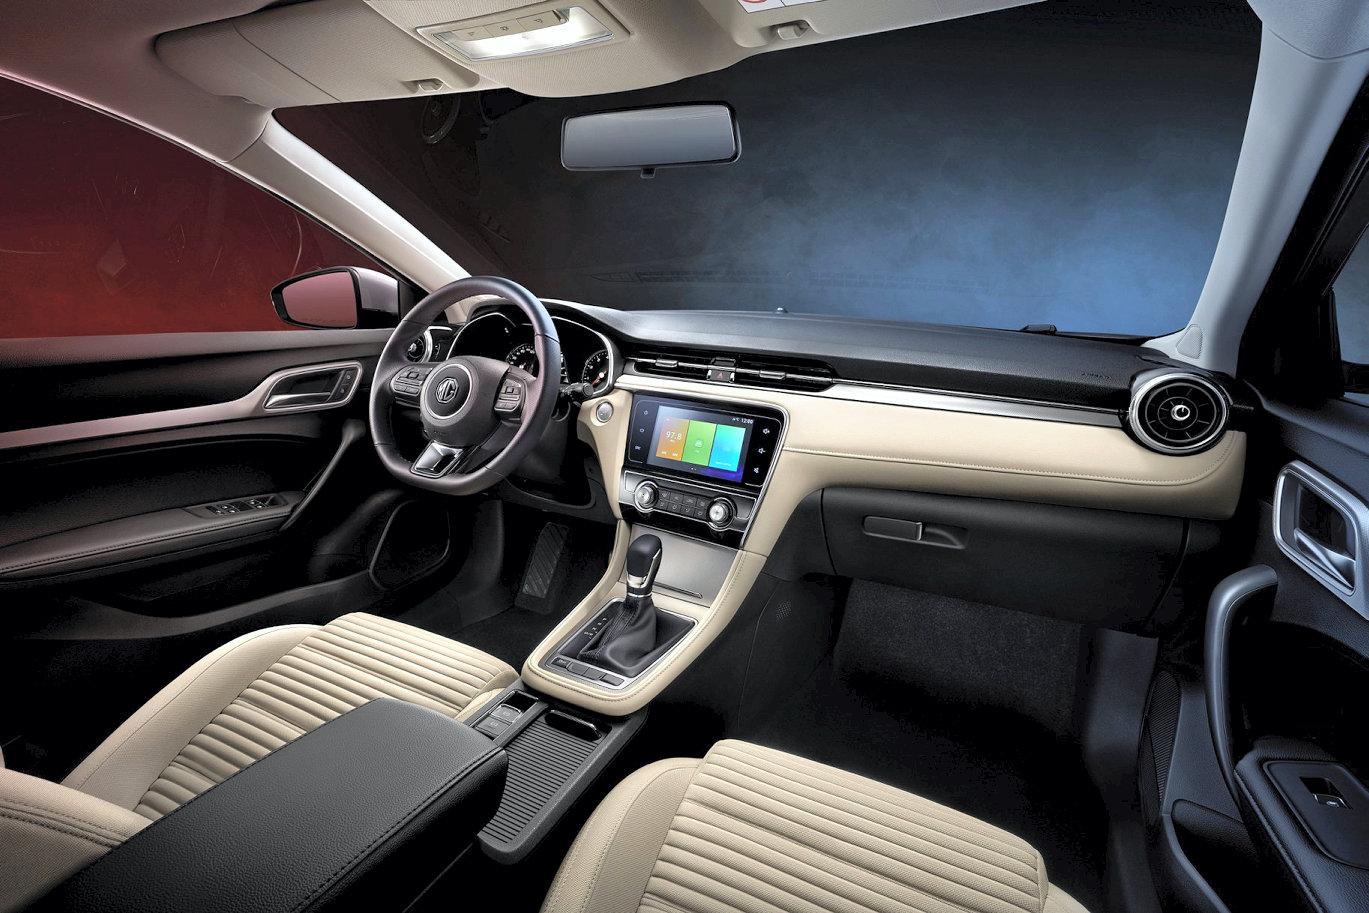 The interiors of the MG 6 emulate designs of European manufacturers. Courtesy MG